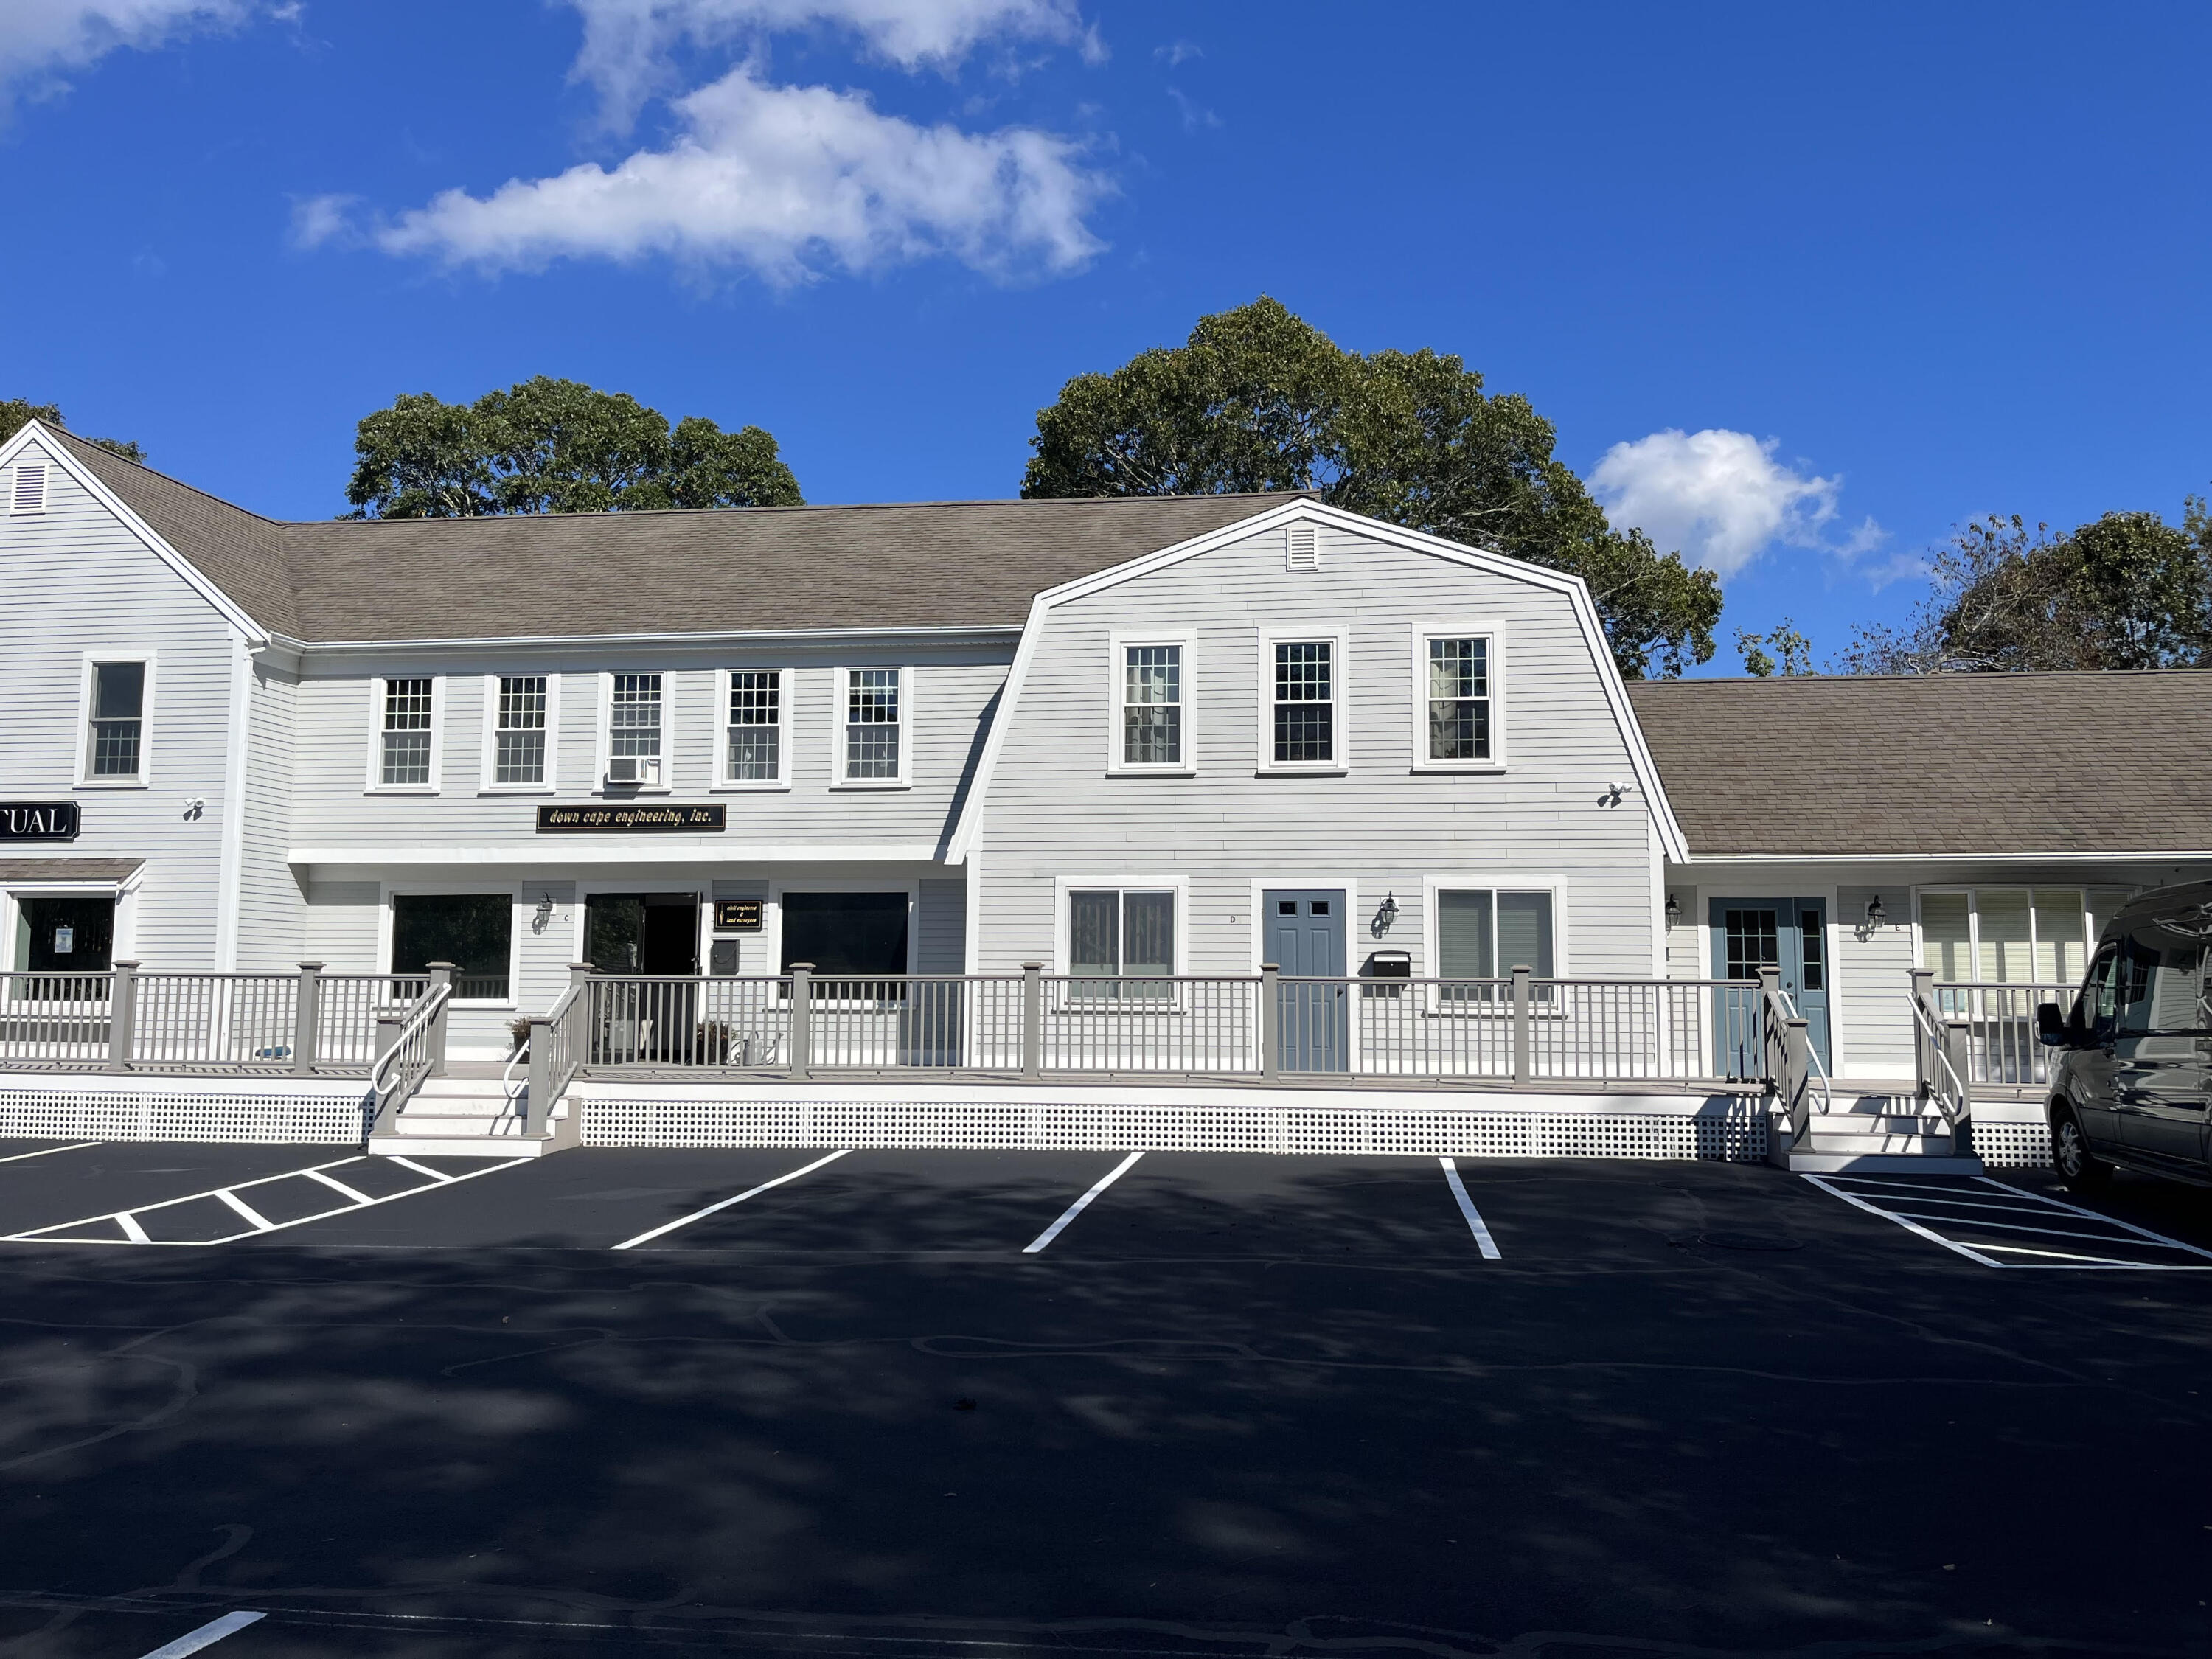 939 Route 6A # D2, Yarmouth Port, Massachusetts 02675, 2 Bedrooms Bedrooms, 4 Rooms Rooms,1 BathroomBathrooms,Residential Lease,For Rent,939 Route 6A # D2,22402028